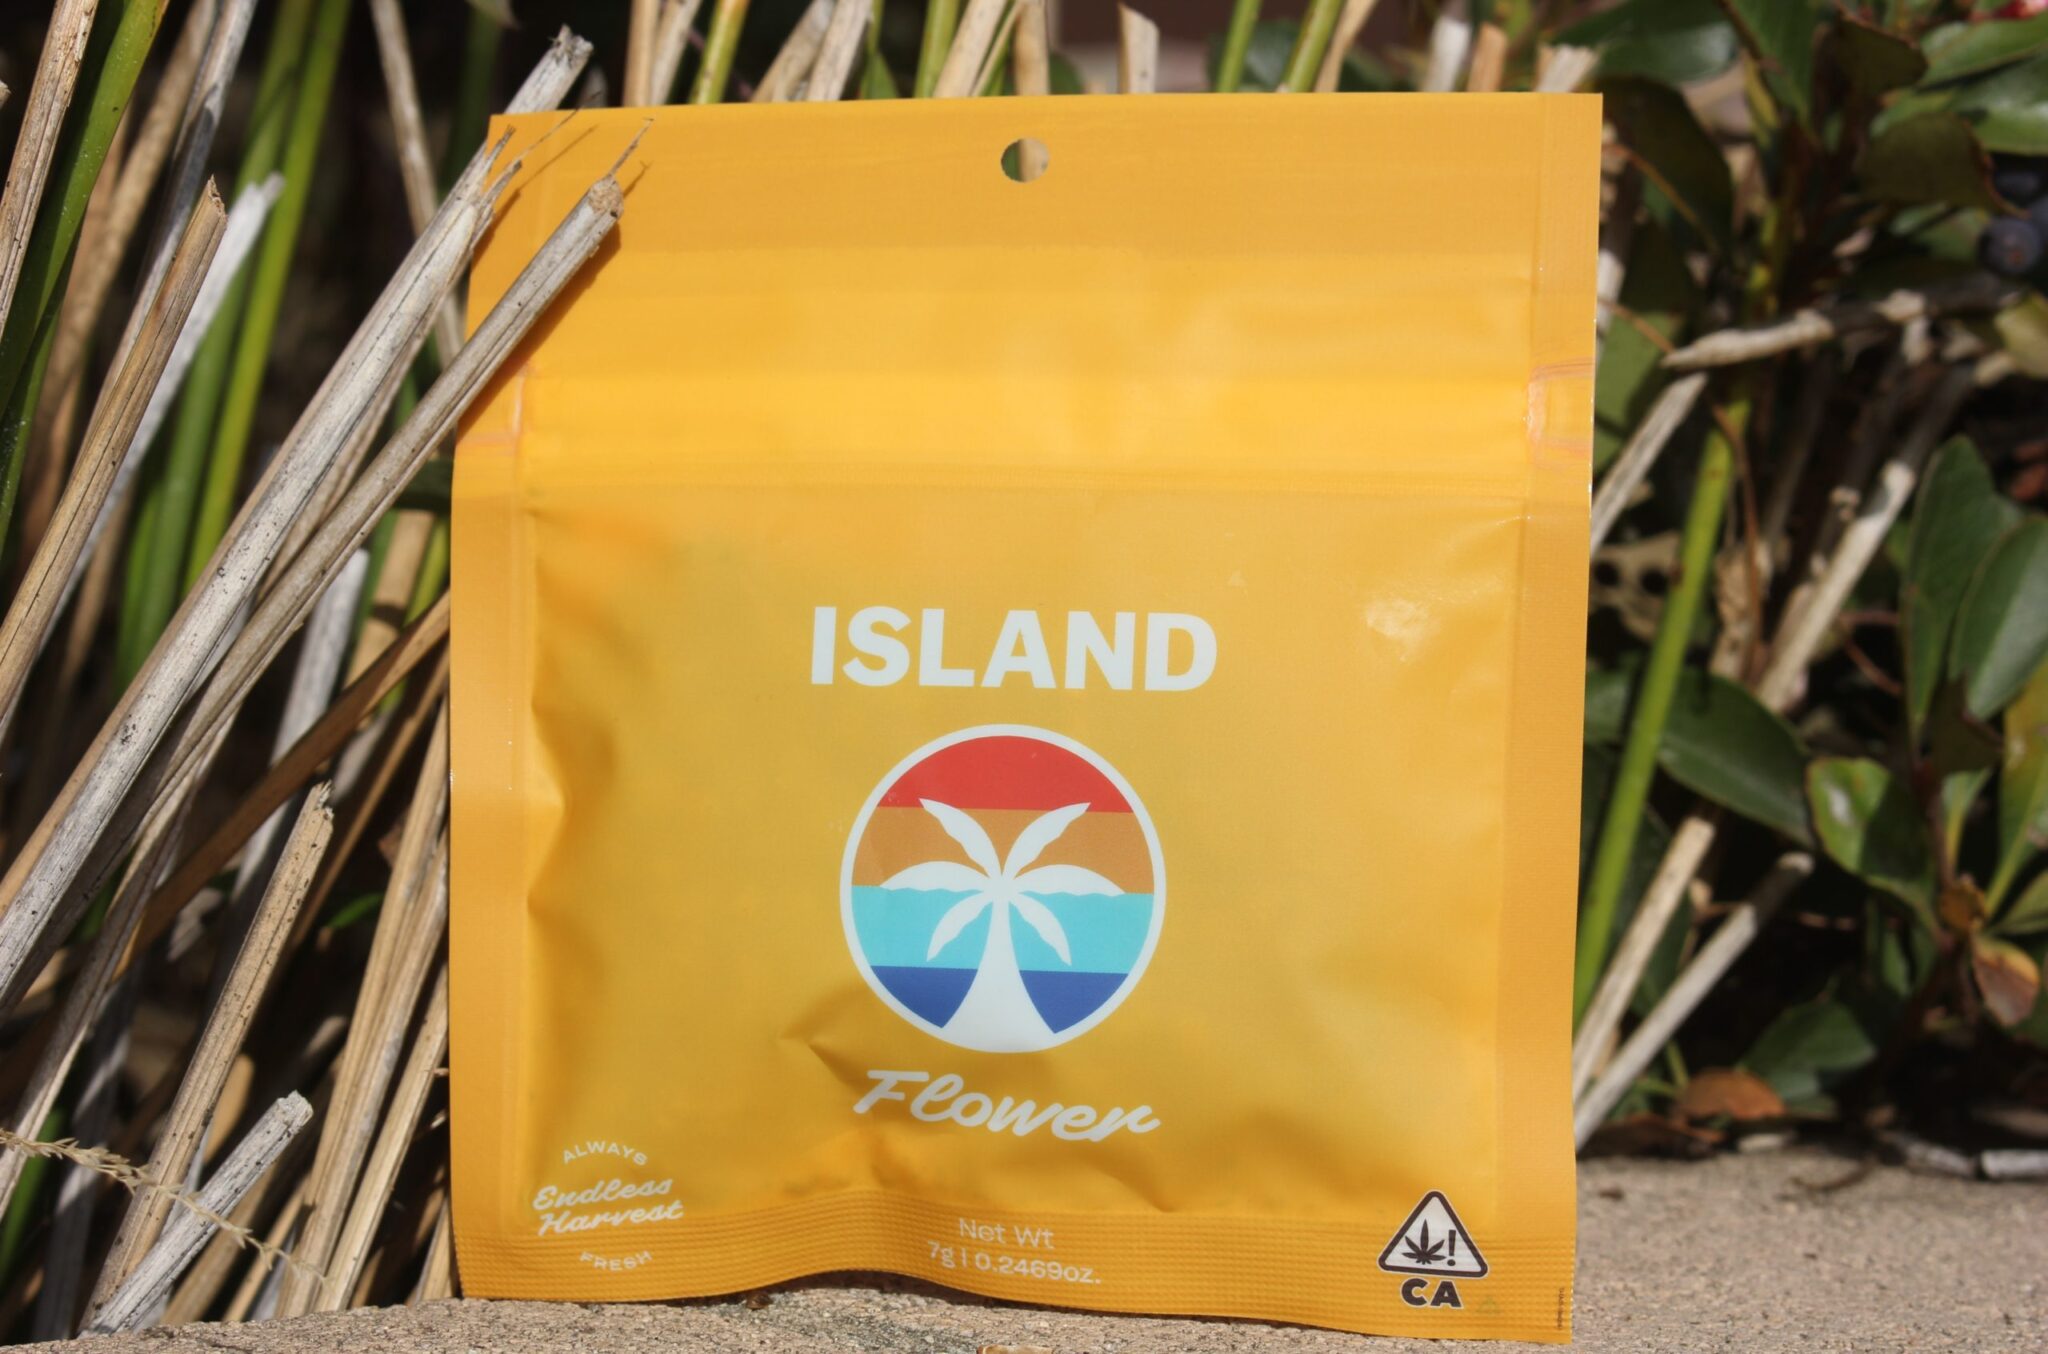 Island cannabis review on Emjay.